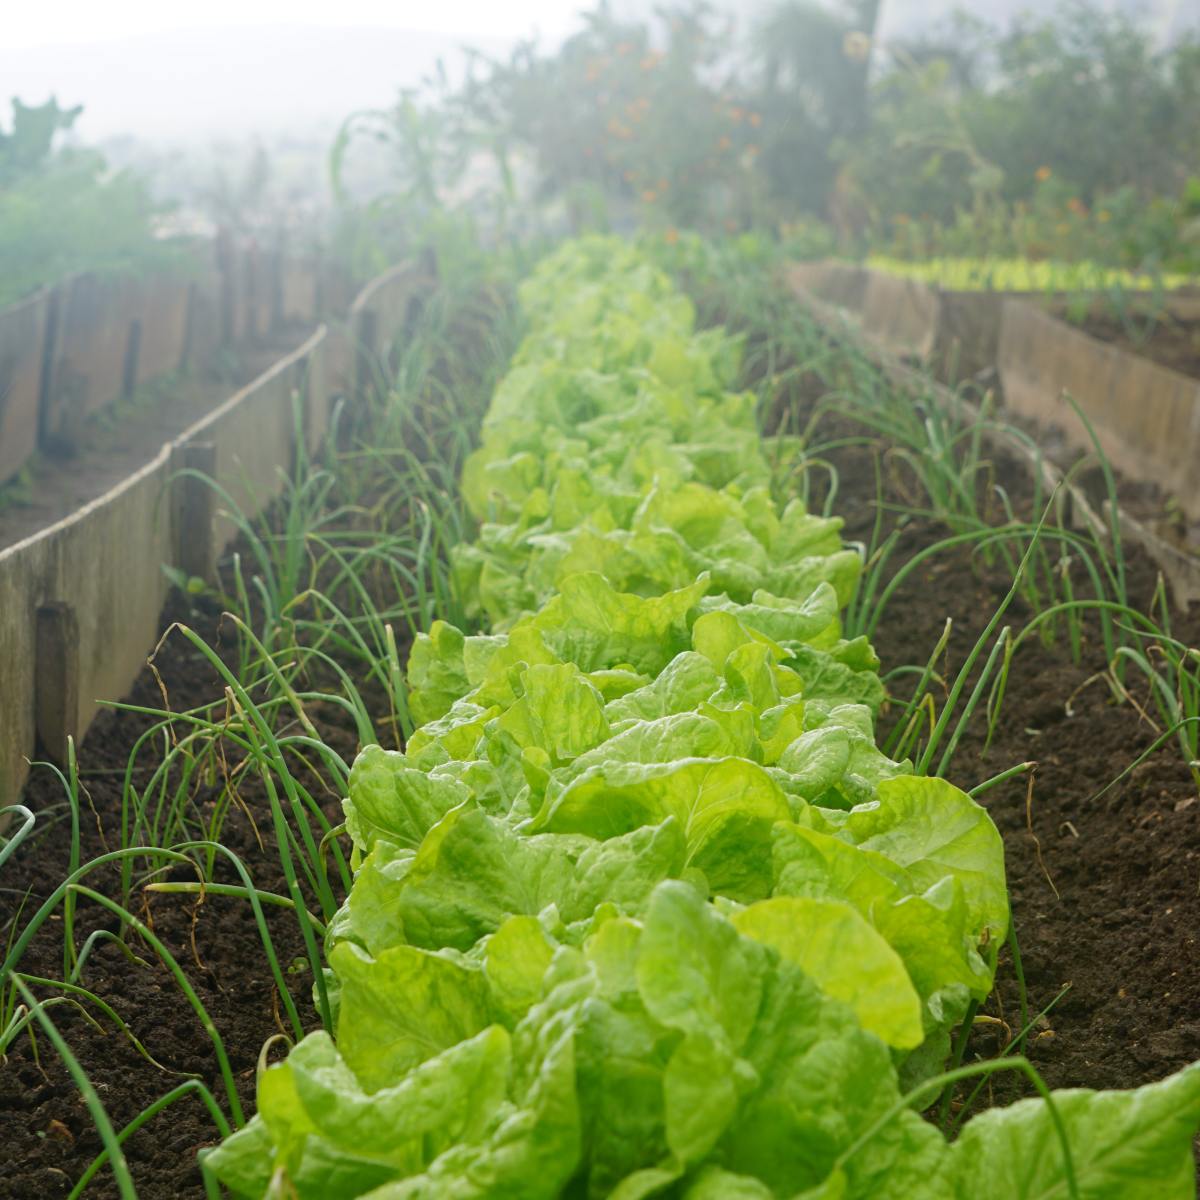 7 Reasons to Grow Your Own Organic Vegetable Garden